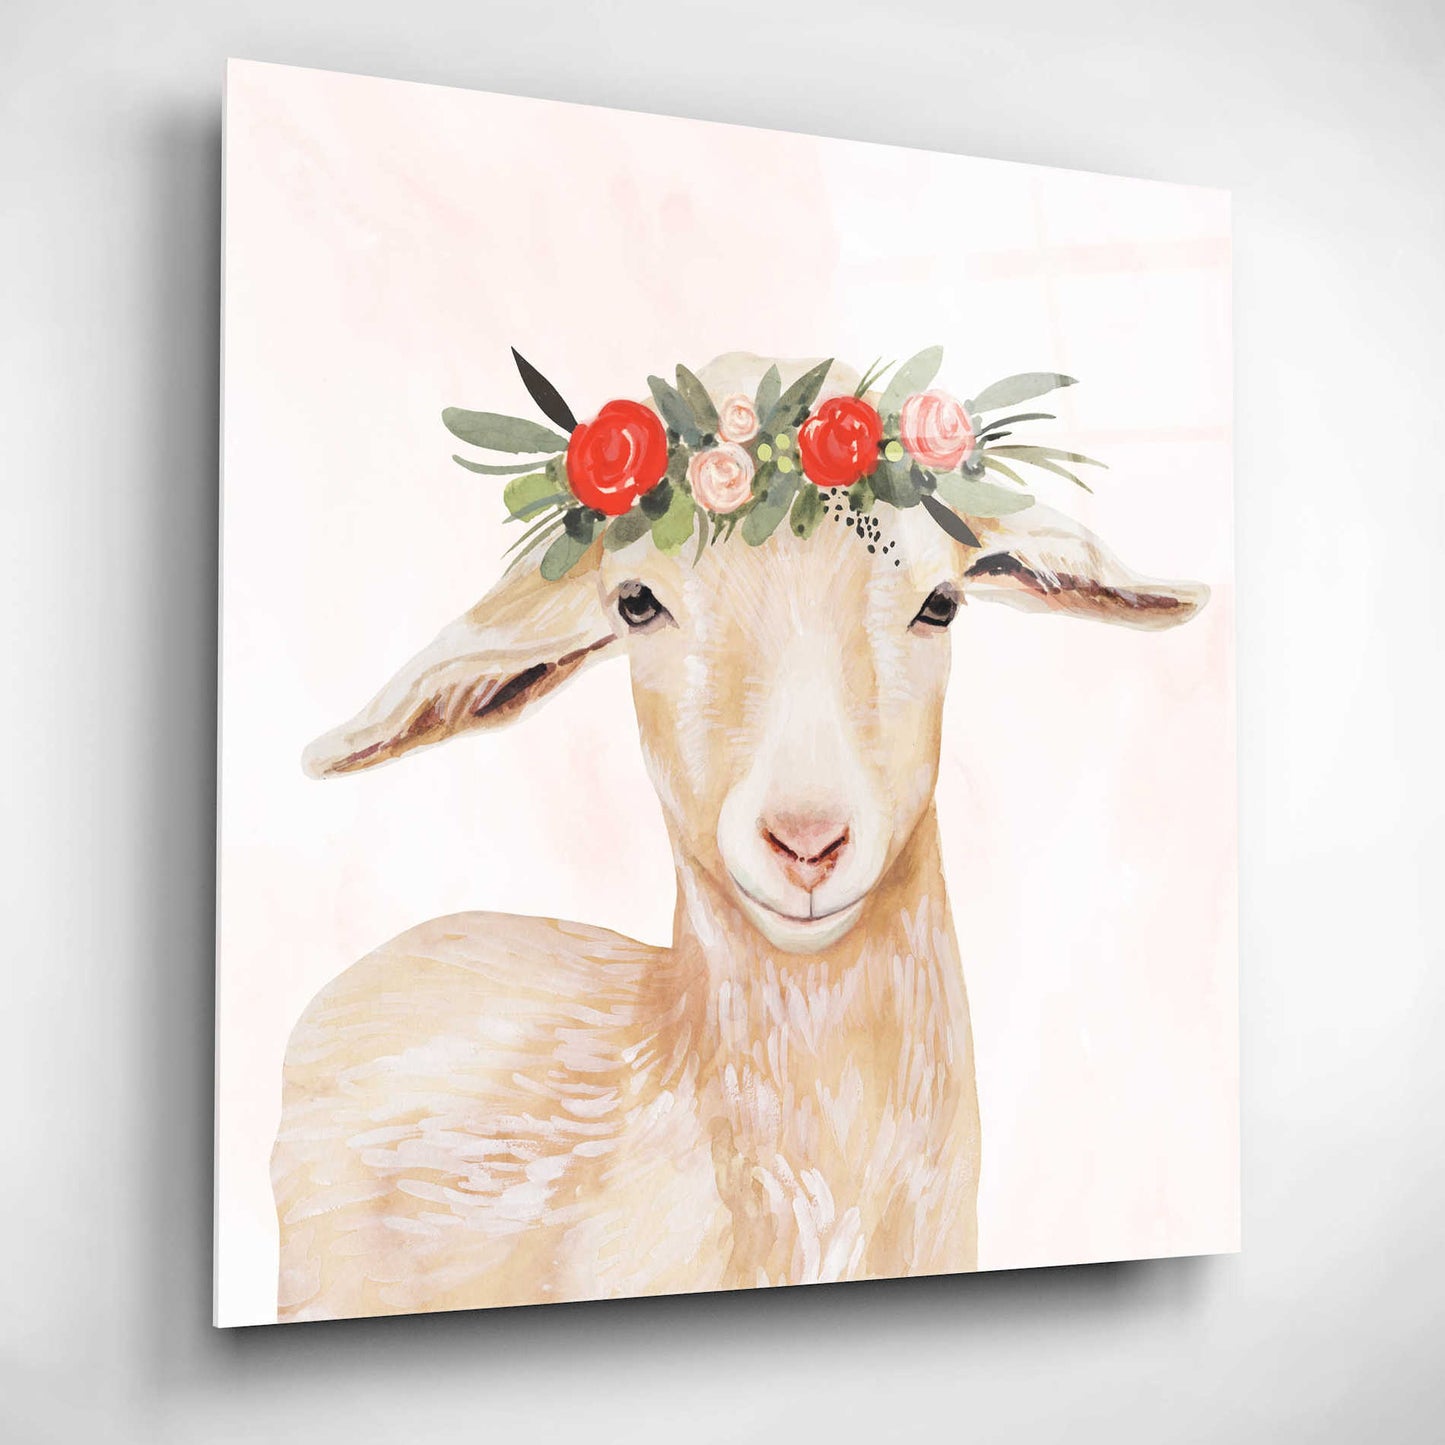 Epic Art 'Garden Goat I' by Victoria Borges, Acrylic Glass Wall Art,12x12